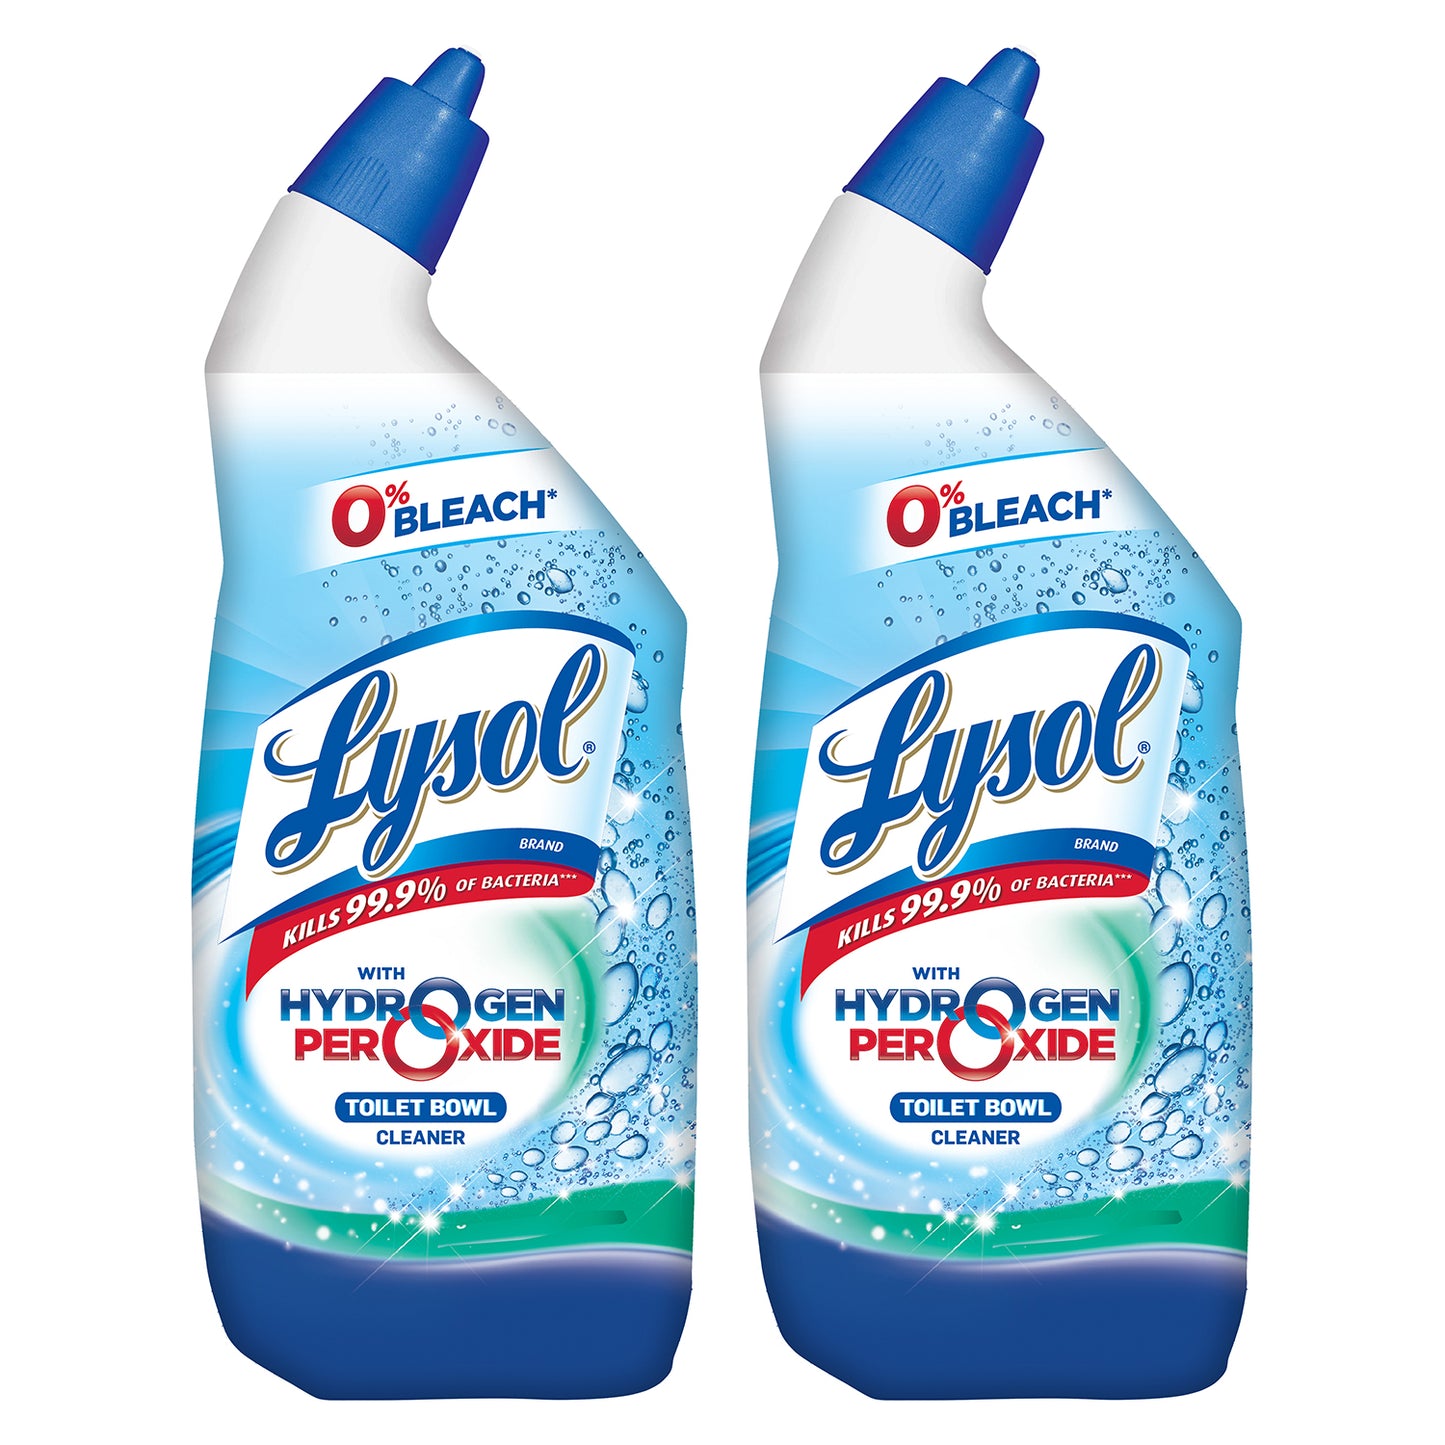 Lysol with Hidrogen Peroxide Toilet Bowl Cleaner Ocean Fresh 24 oz "2-PACK"